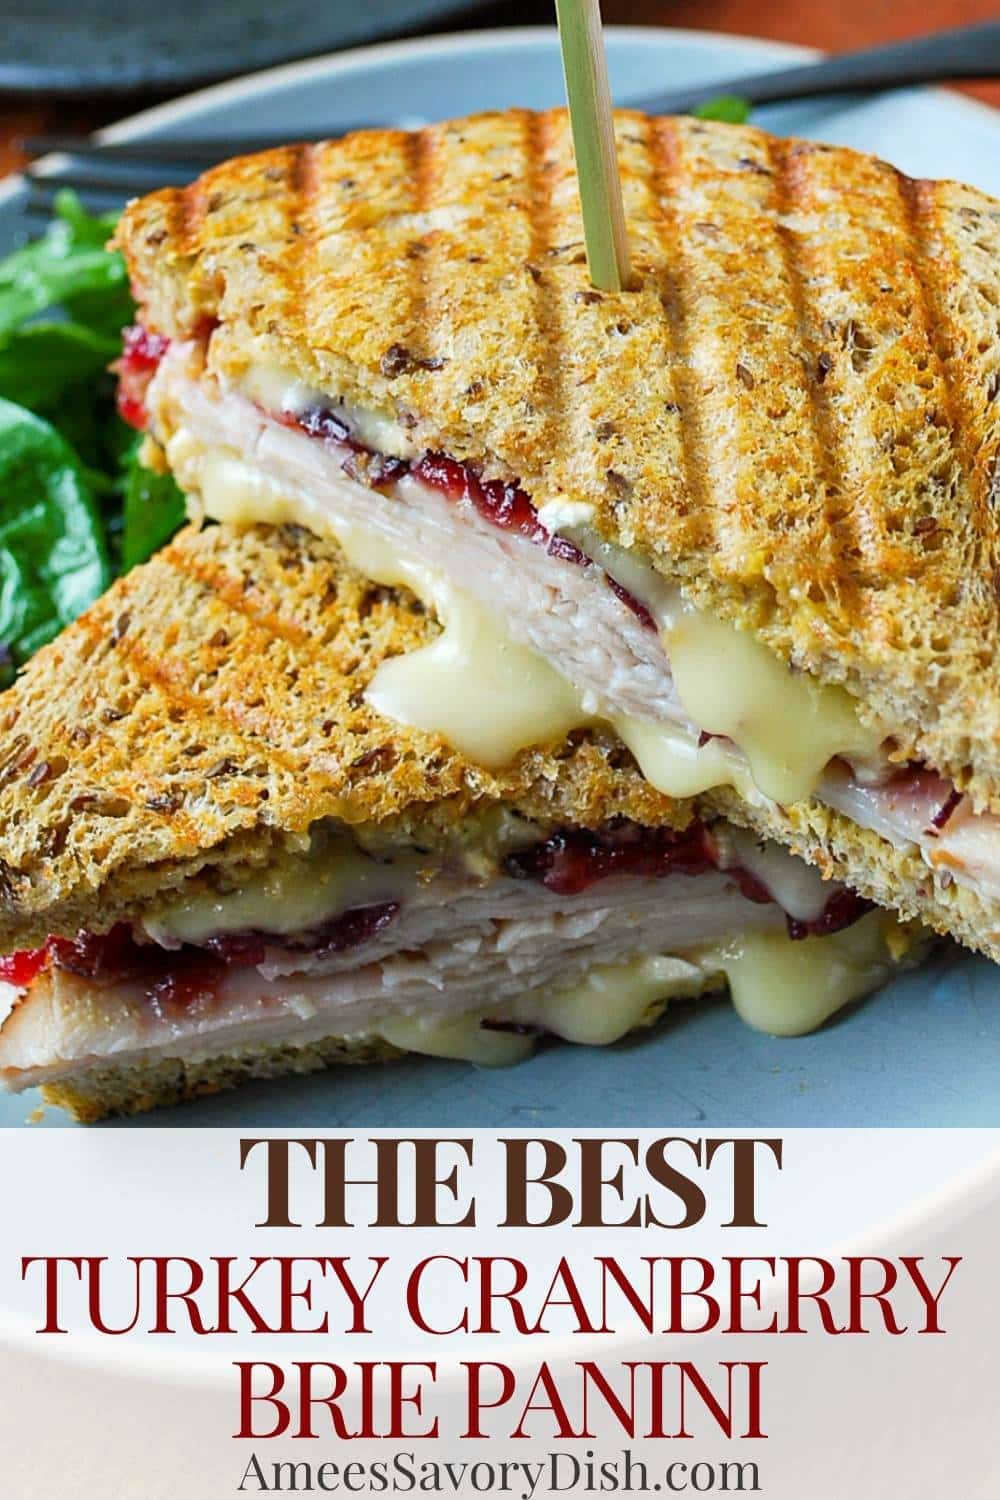 A recipe makeover of Panera's turkey cranberry brie panini using whole grain bread, turkey breast, soft brie, and homemade cranberry sauce. via @Ameessavorydish